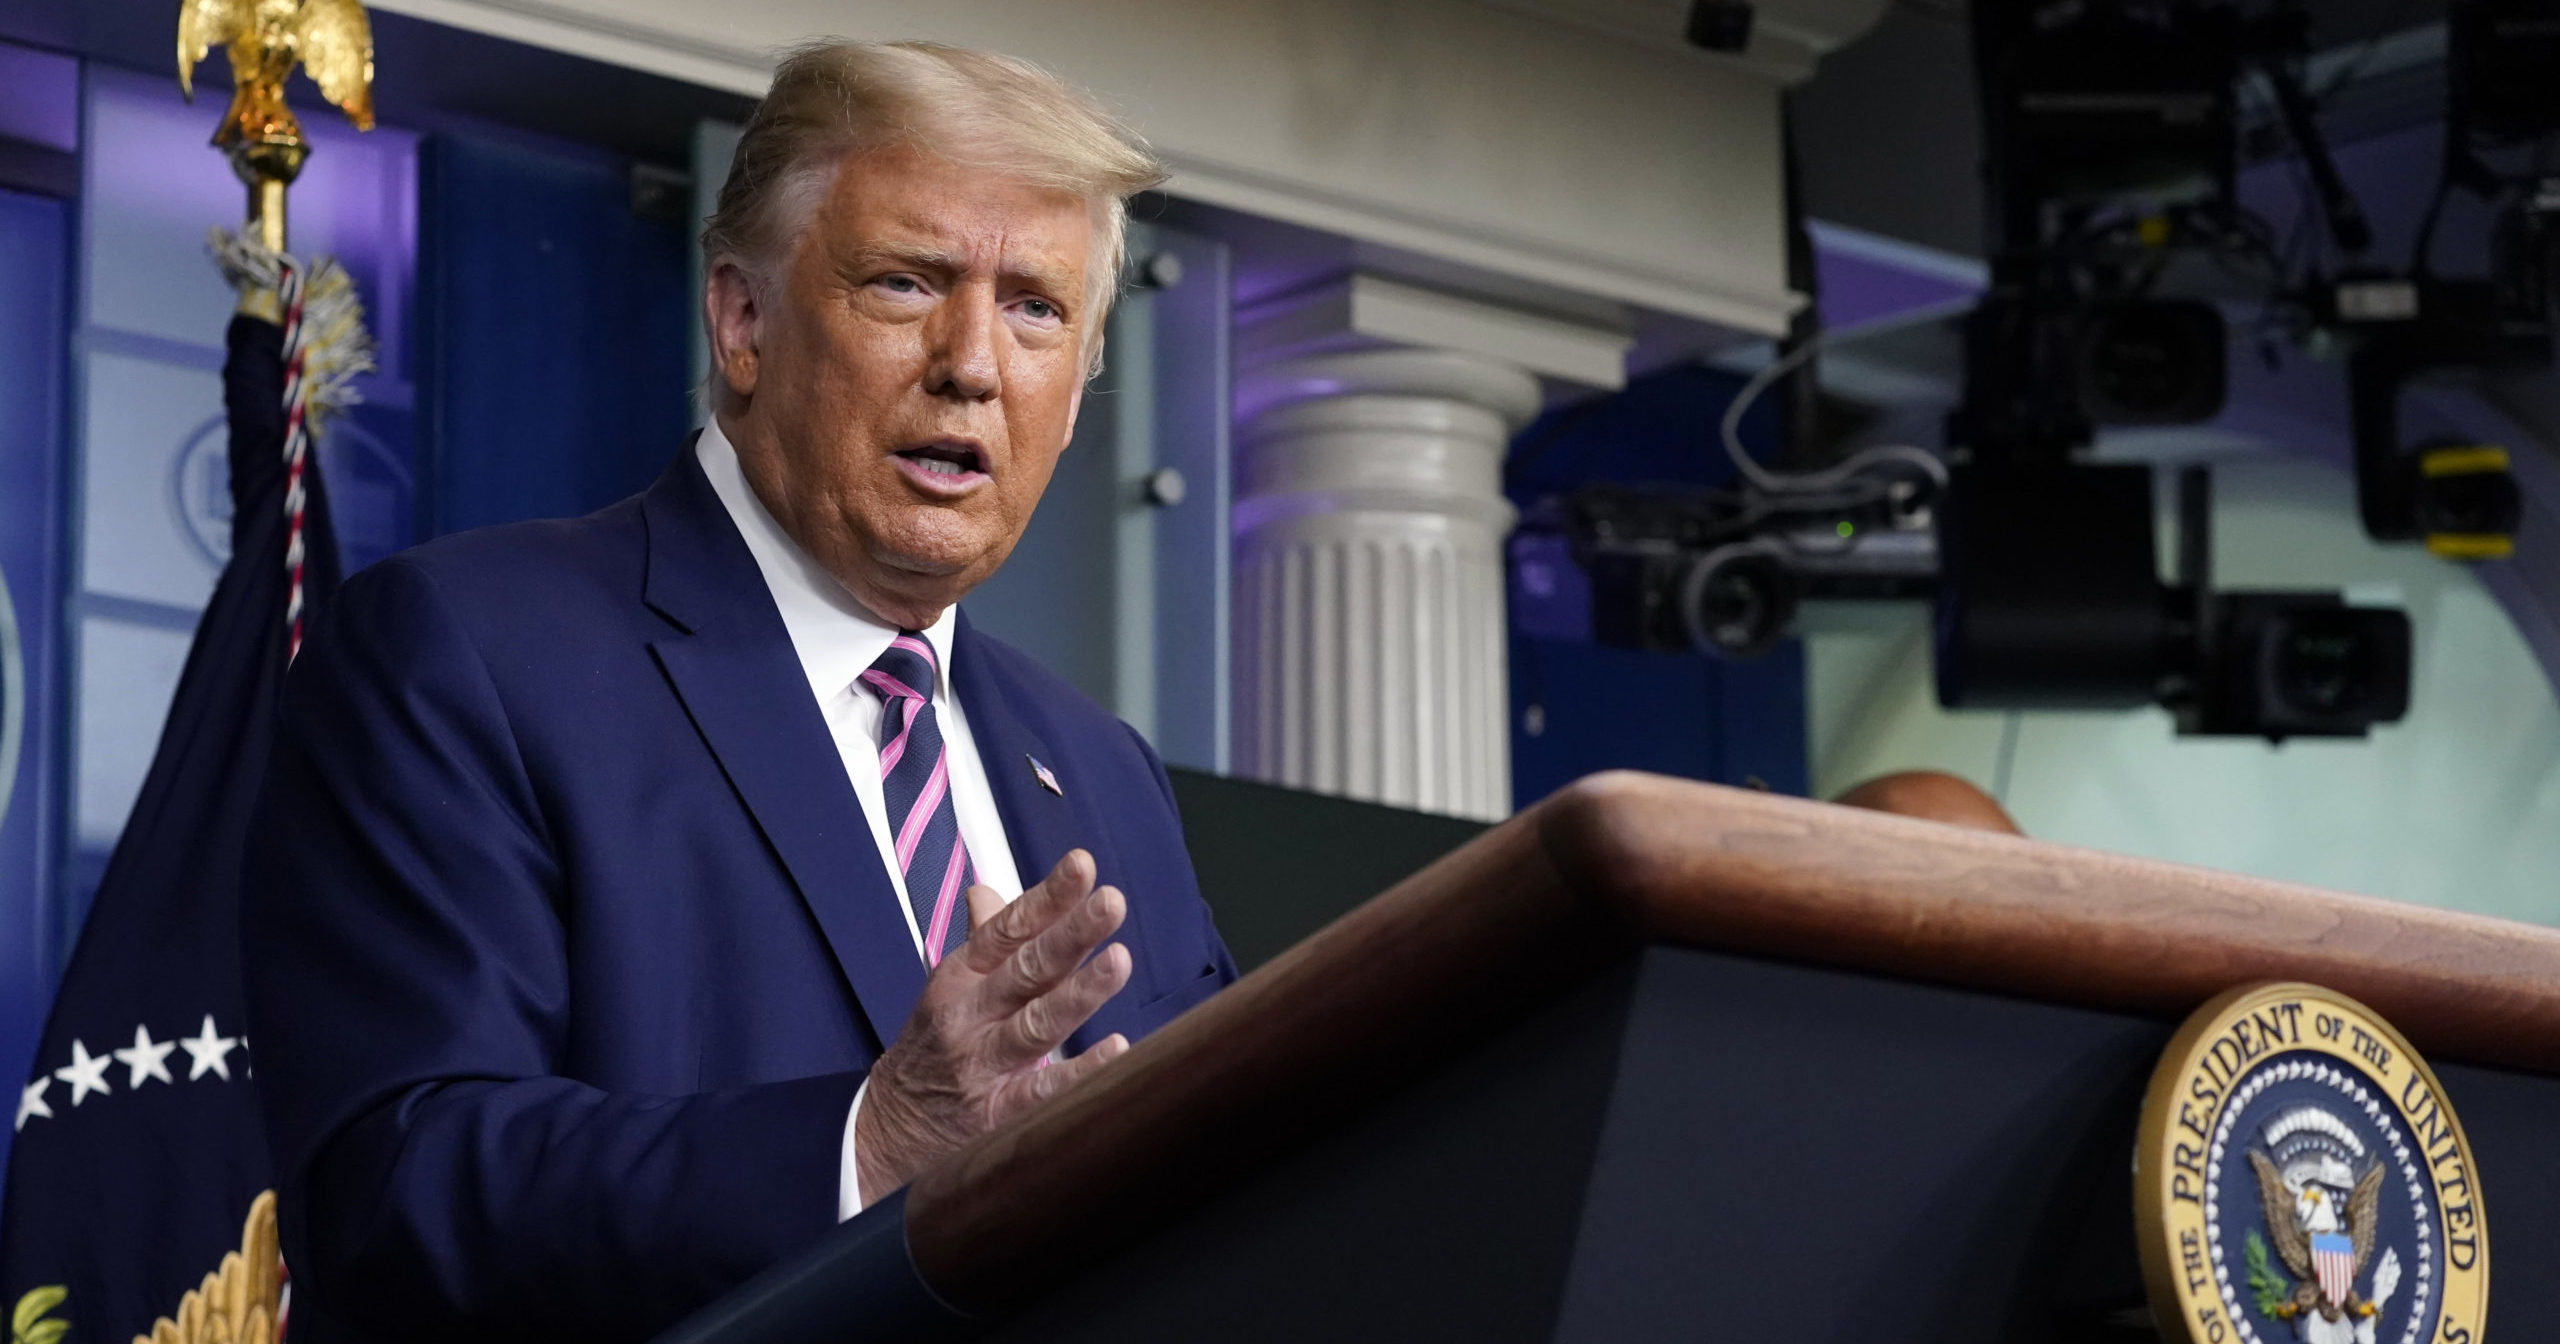 President Donald Trump speaks during a news conference in the White House on Sept. 18, 2020, in Washington, D.C.